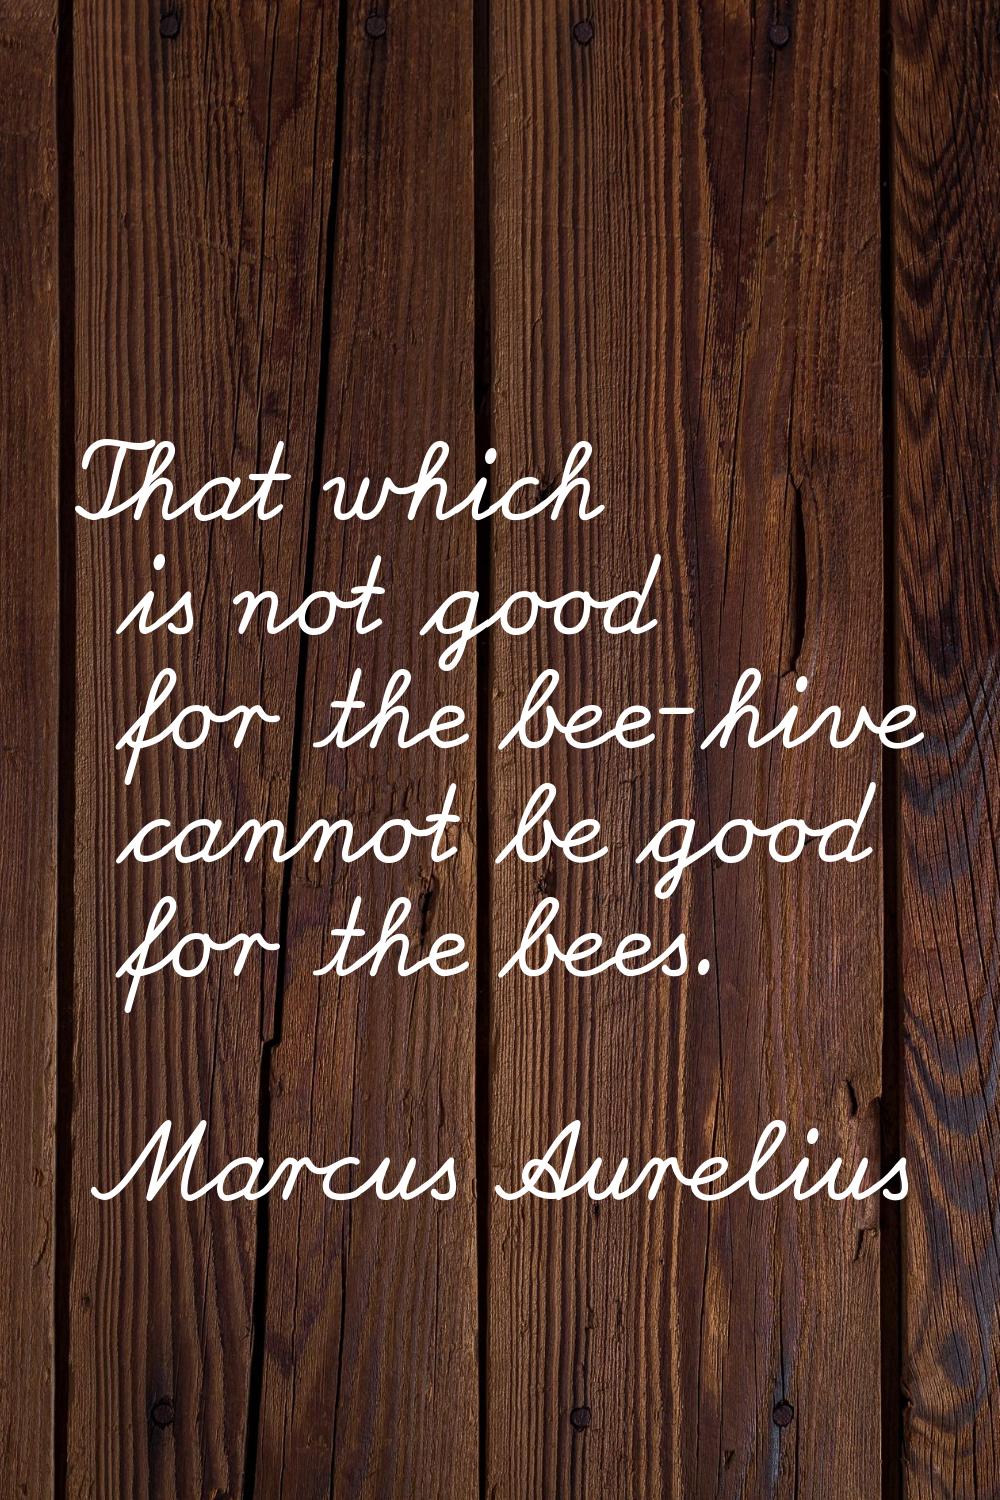 That which is not good for the bee-hive cannot be good for the bees.